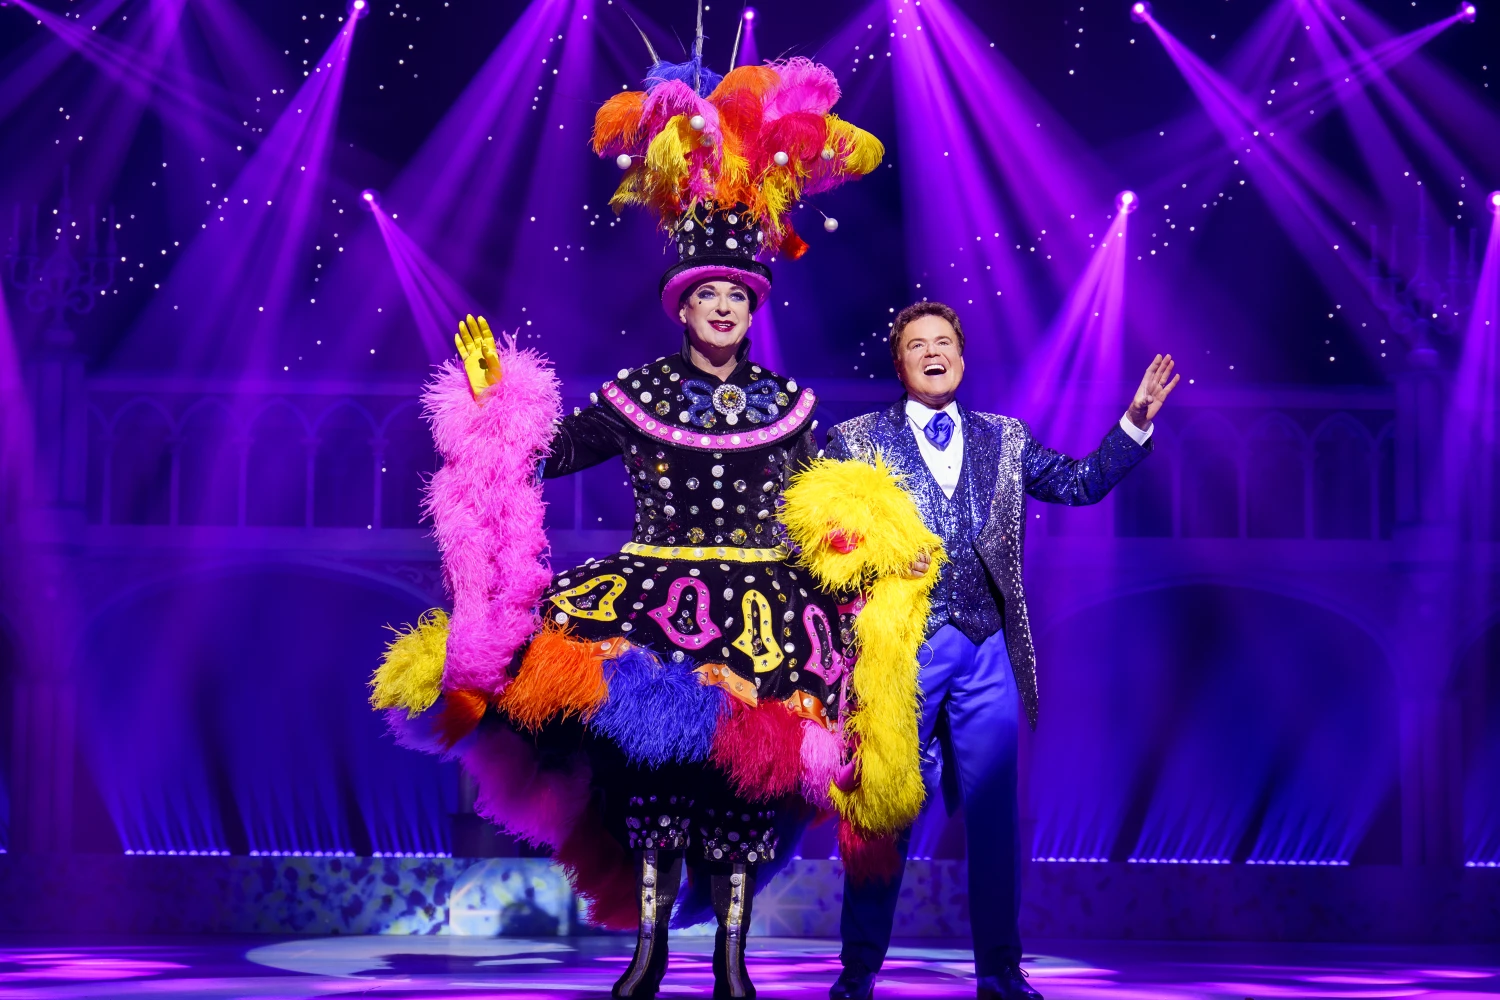 Pantoland At The Palladium: What to expect - 2